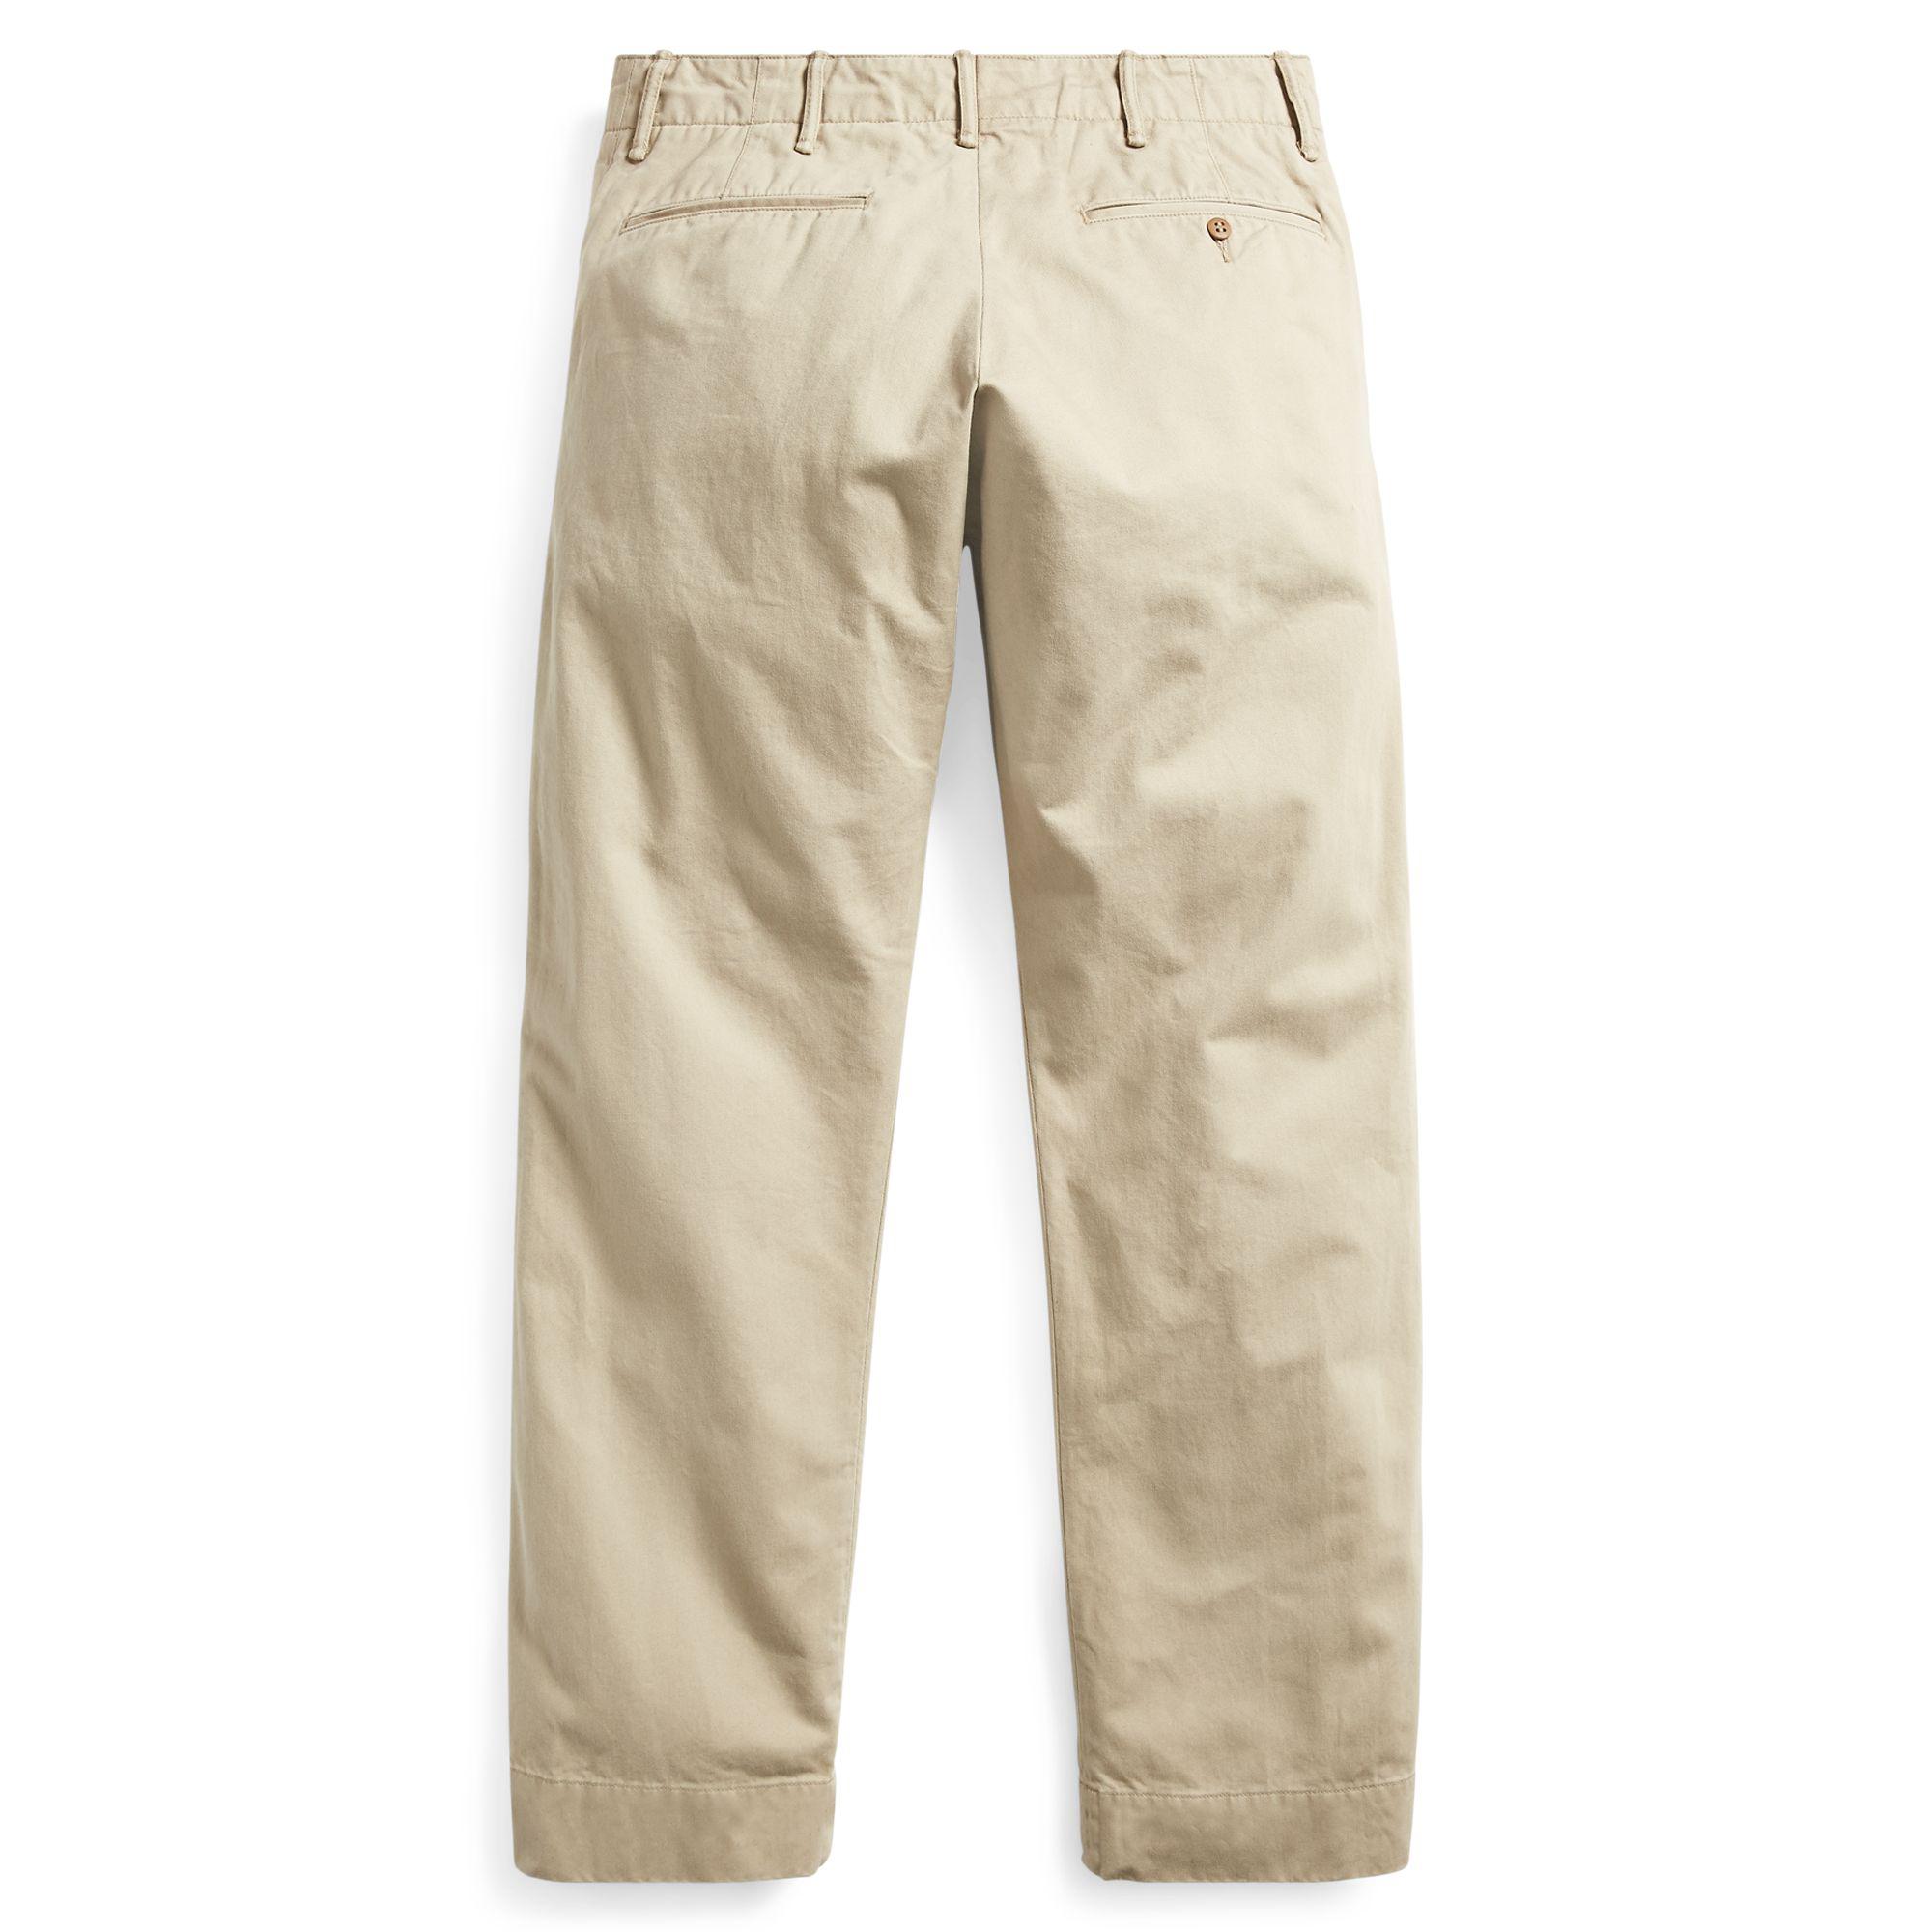 Lyst - RRL Cotton Field Chino in Natural for Men